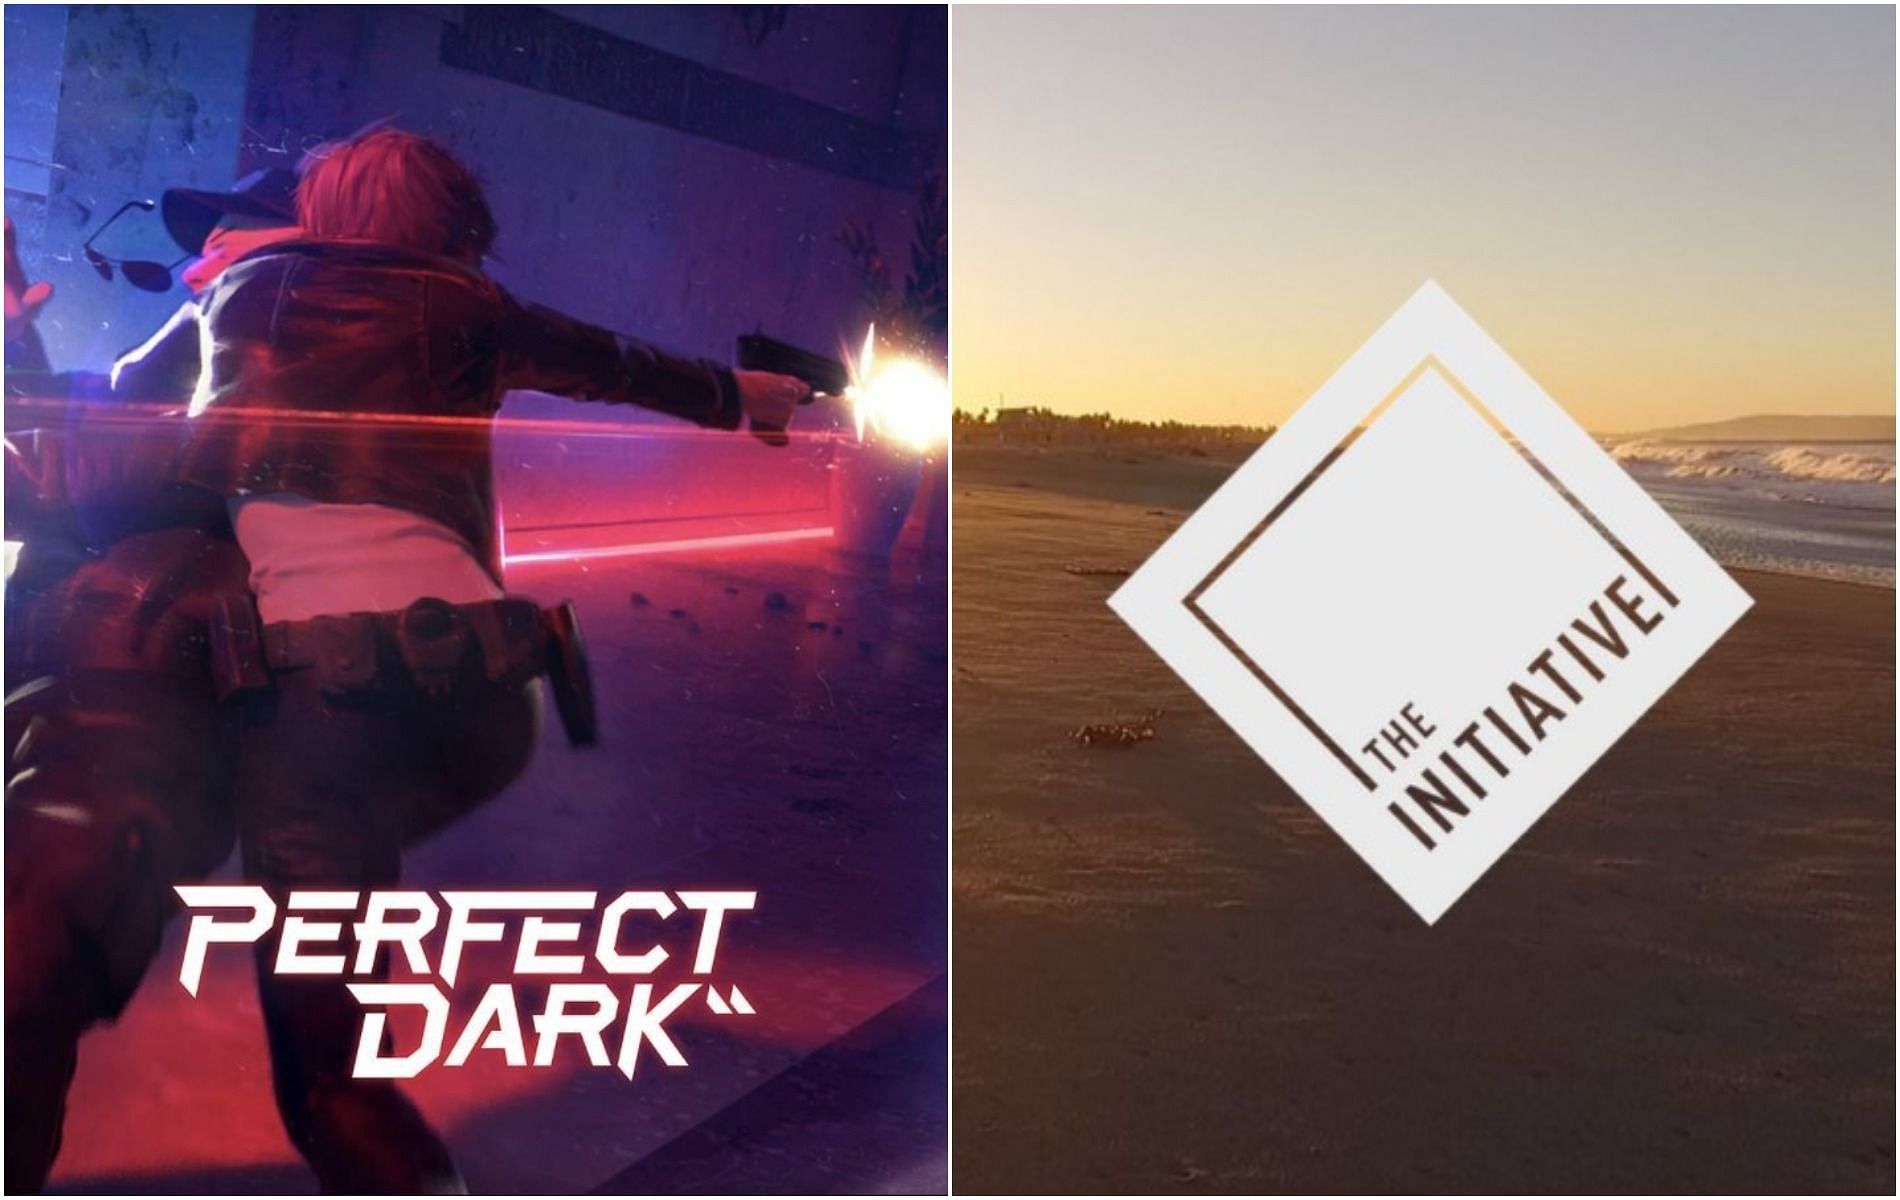 With talented developers leaving The Initiative, what does it mean for Perfect Dark? (Image by Xbox)